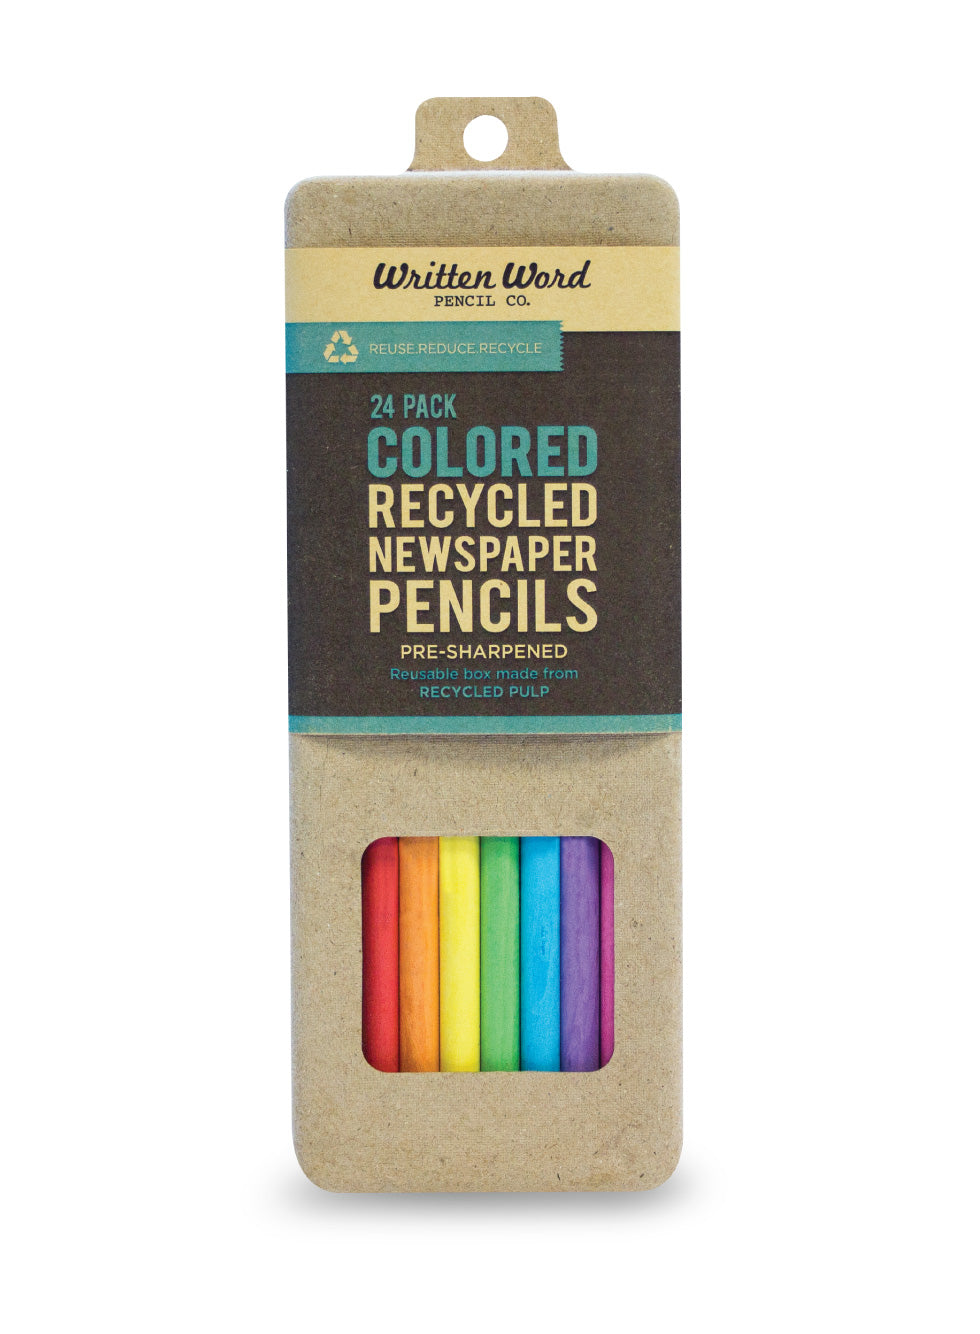 Colored Recycled Newspaper Pencils - 24 Pack